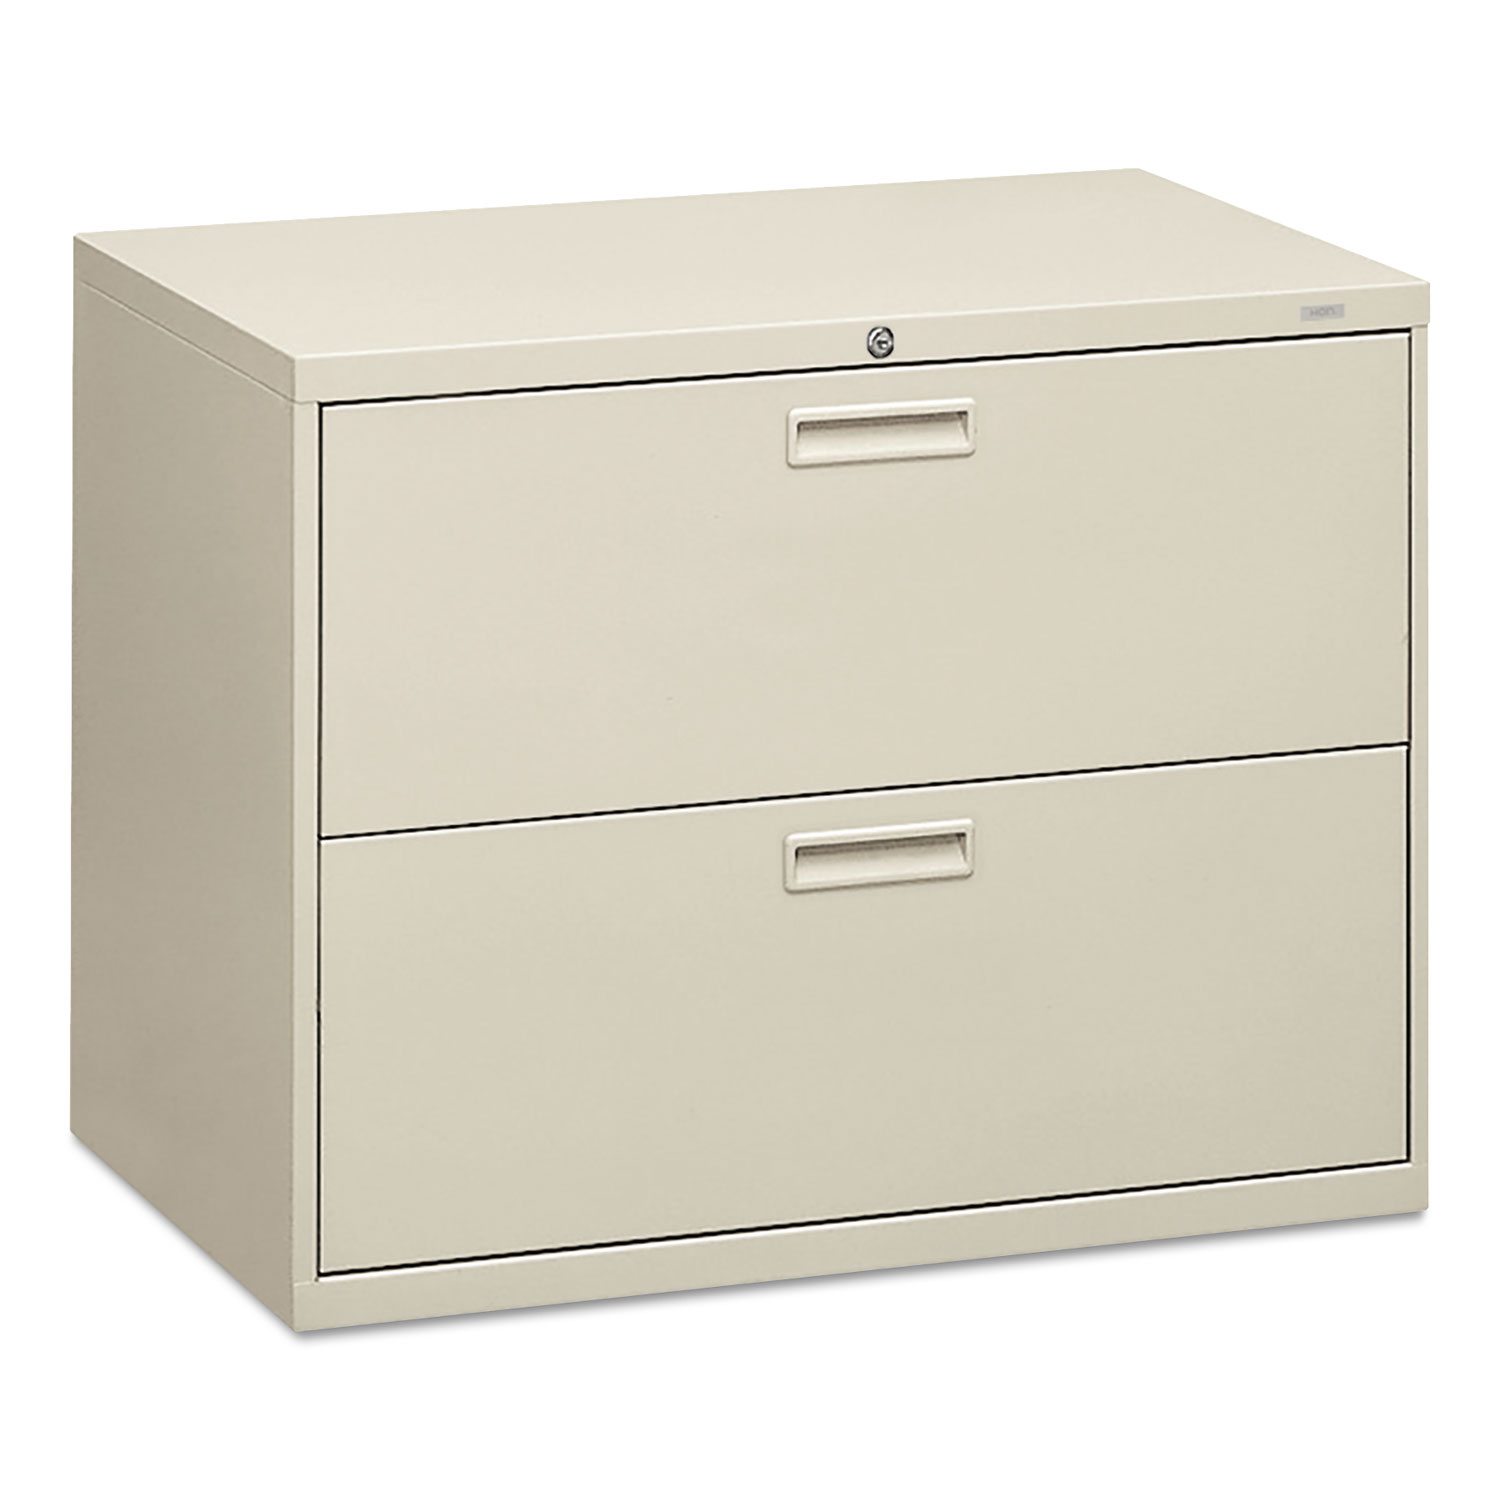 500 Series Two-Drawer Lateral File, 36w x 19-1/4d x 28-3/8h, Light Gray